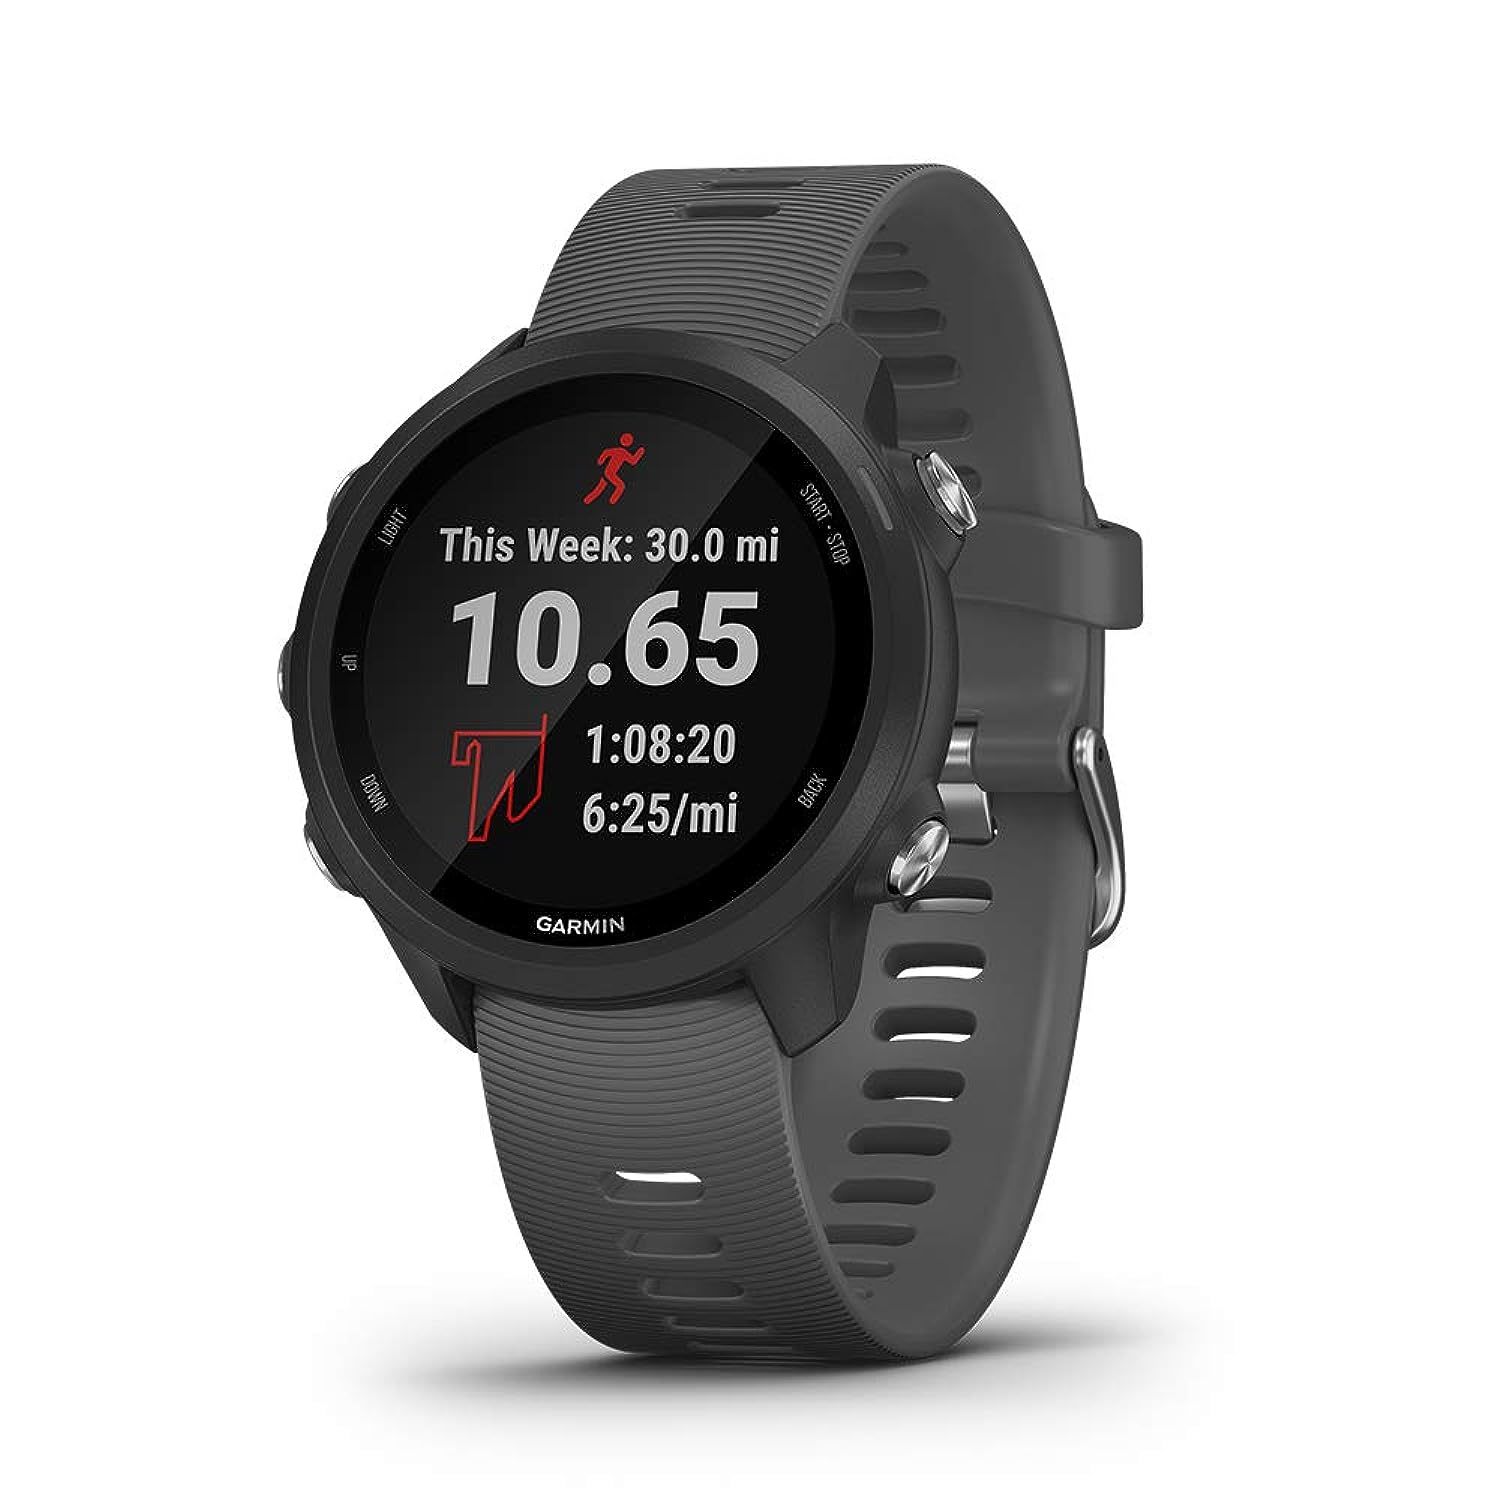 Primary image for Garmin Forerunner 245, GPS Running Smartwatch with Advanced Dynamics, Slate Gray